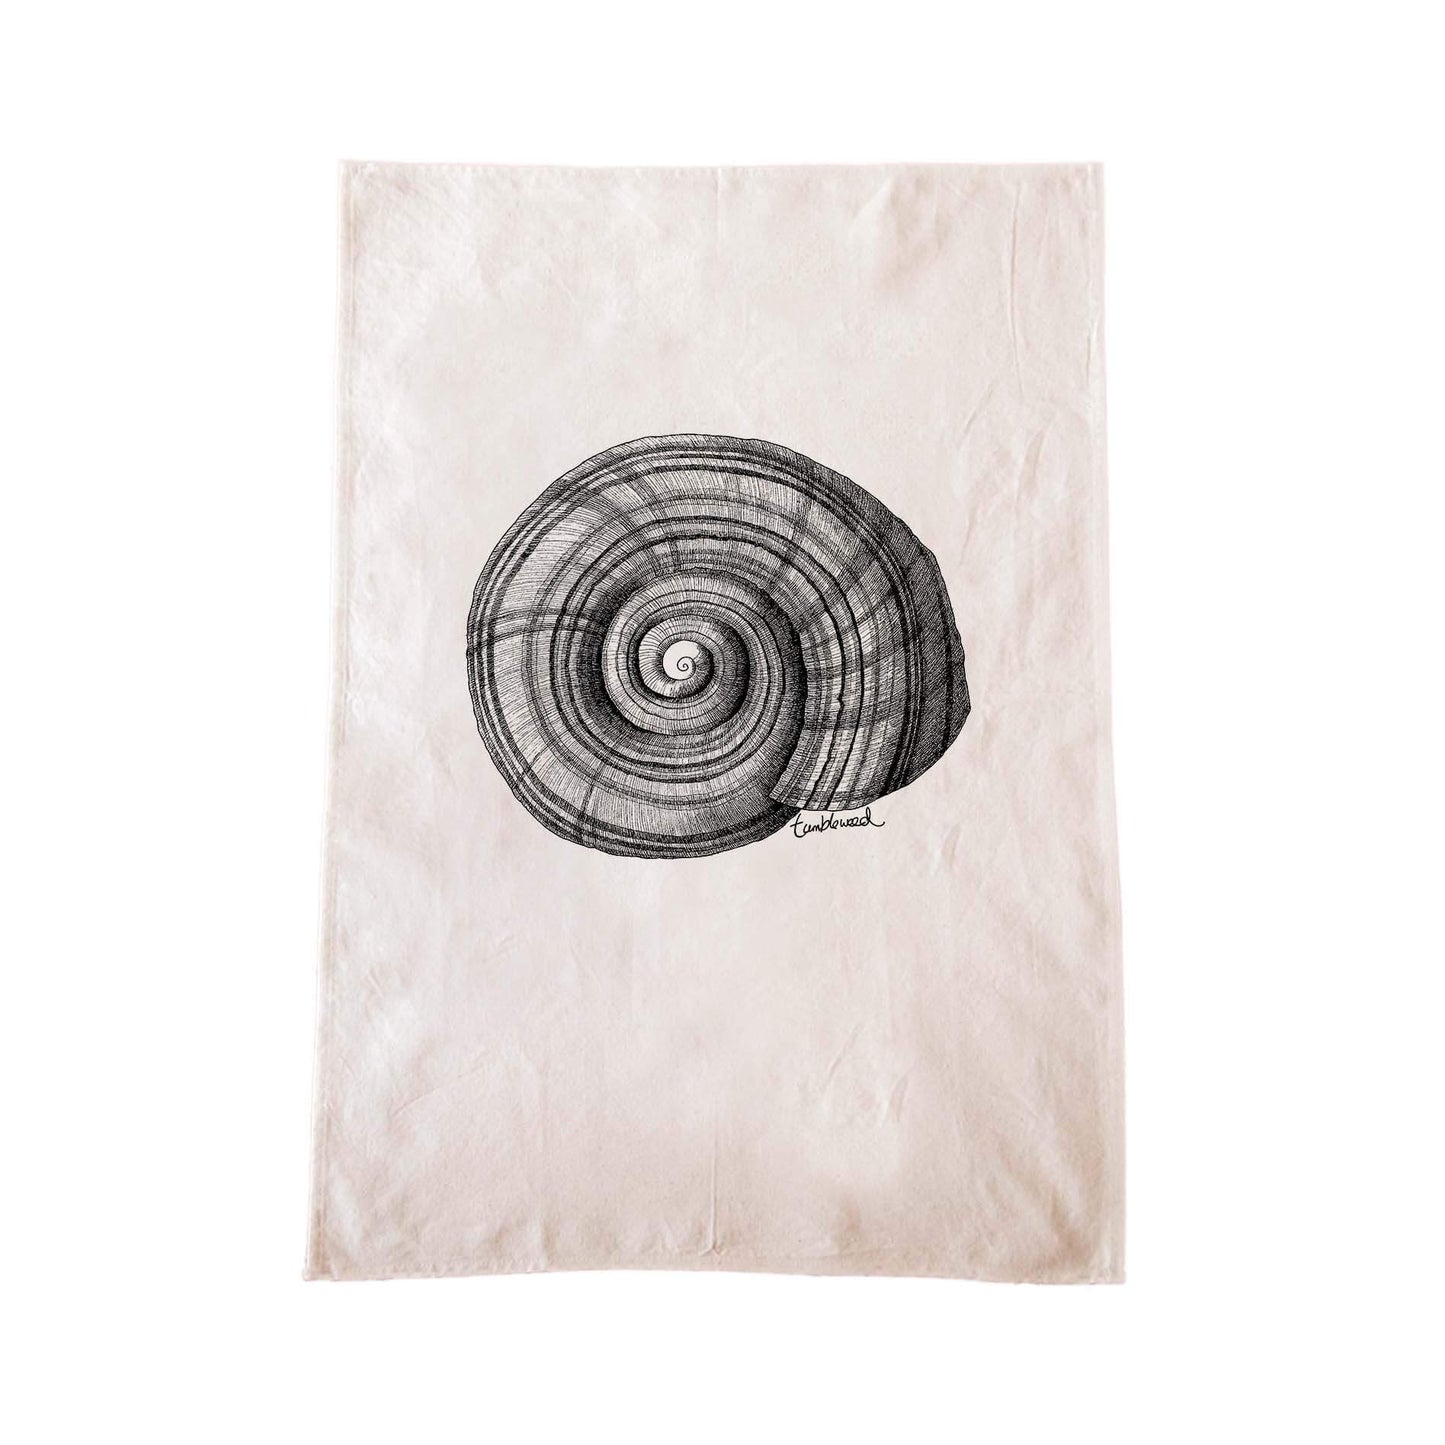 Off-white cotton tea towel with a screen printed NZ Snail design.